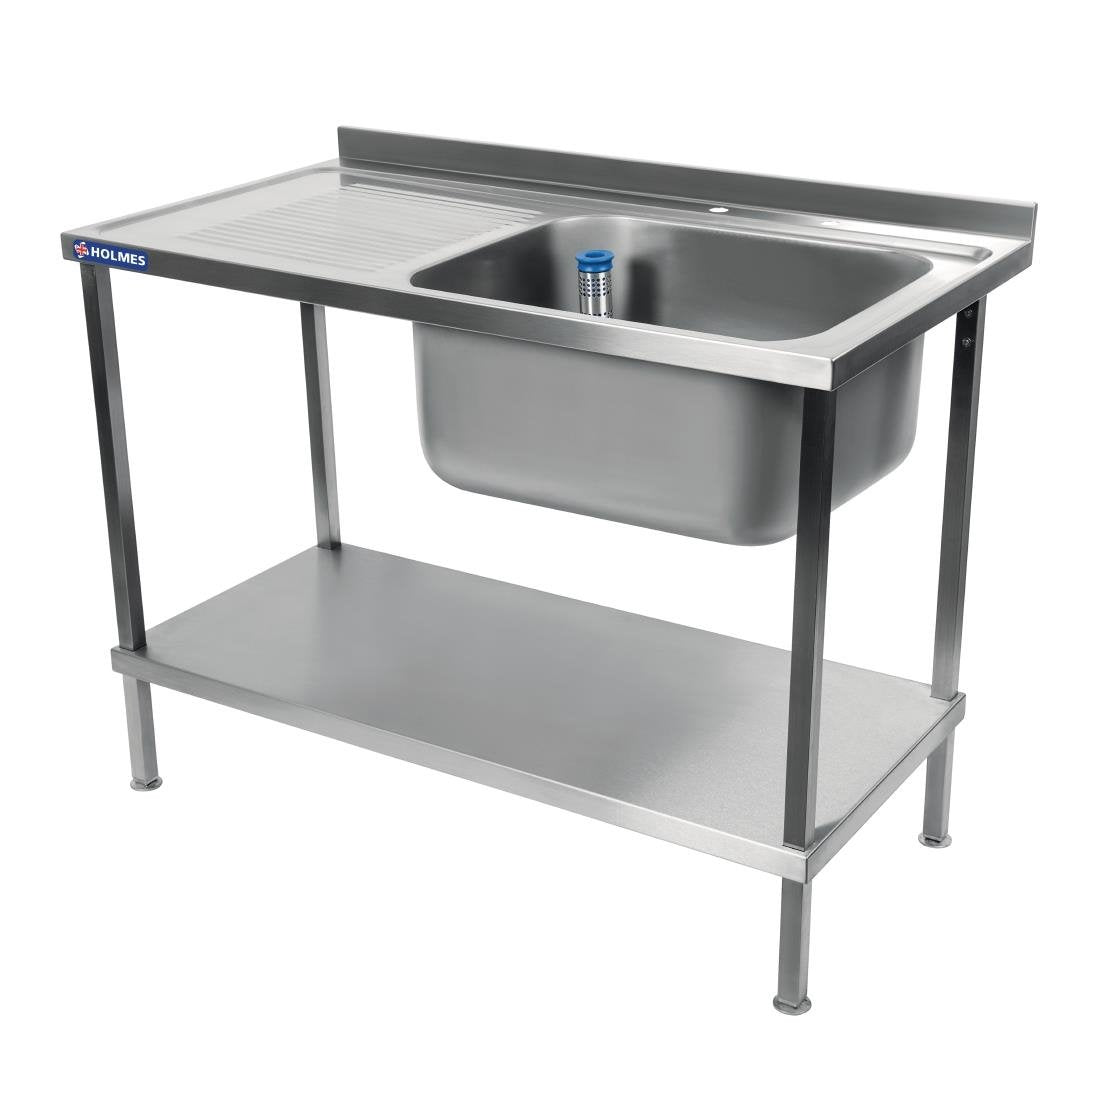 DR387 Holmes Fully Assembled Stainless Steel Sink Left Hand Drainer 1200mm JD Catering Equipment Solutions Ltd